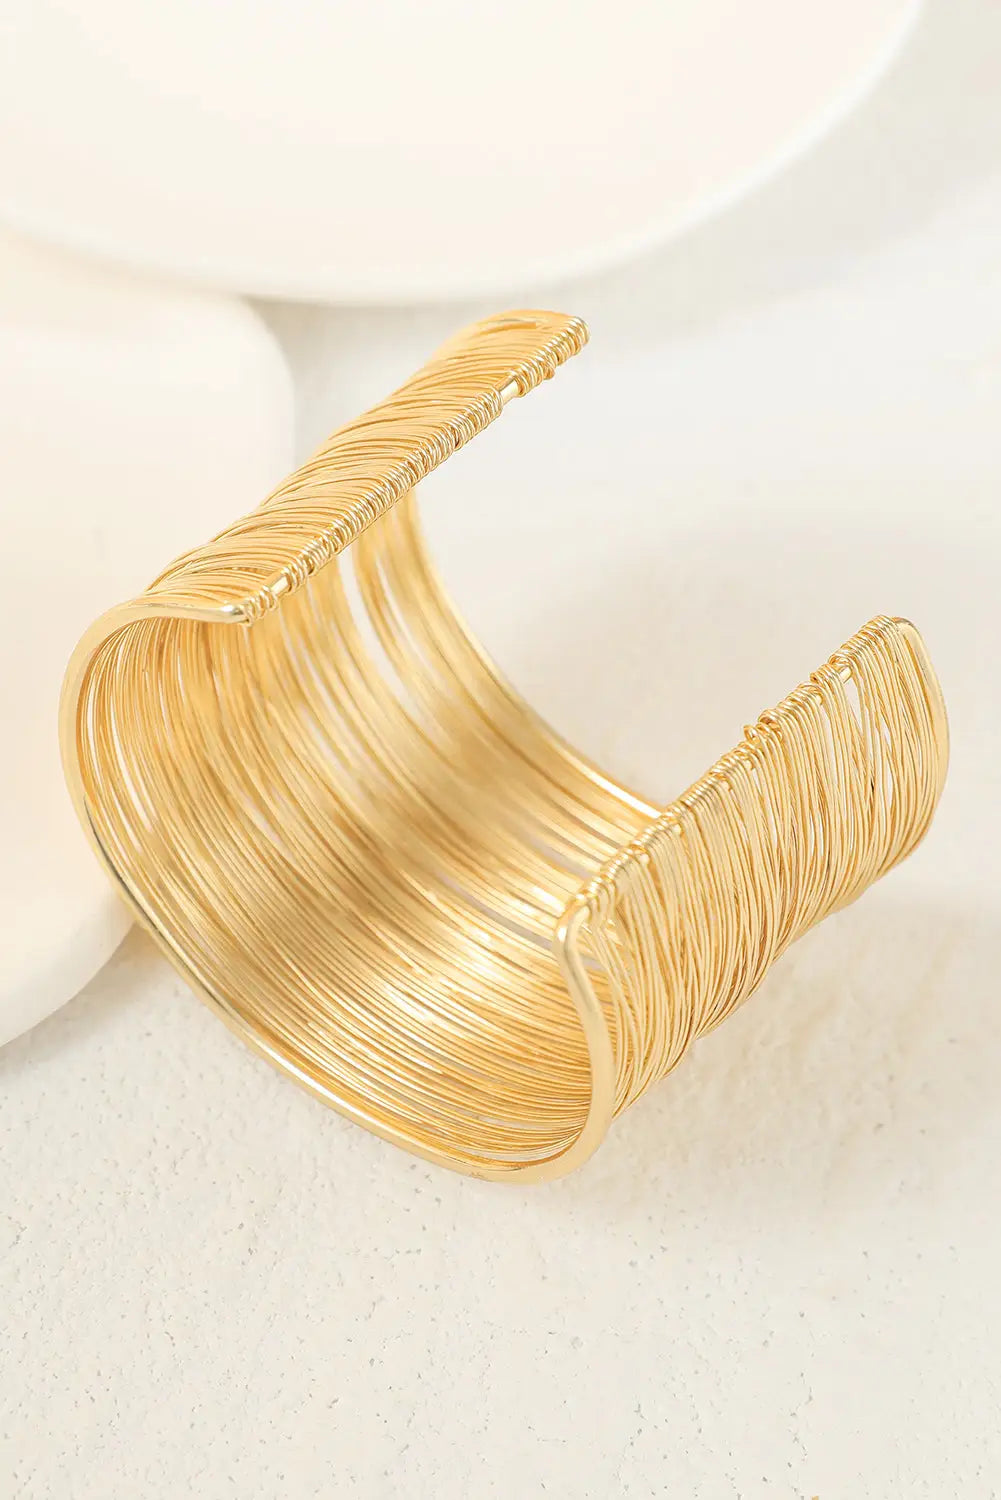 Gold luxury heavy metal high quality open wire bracelet - one size / alloy - accessories